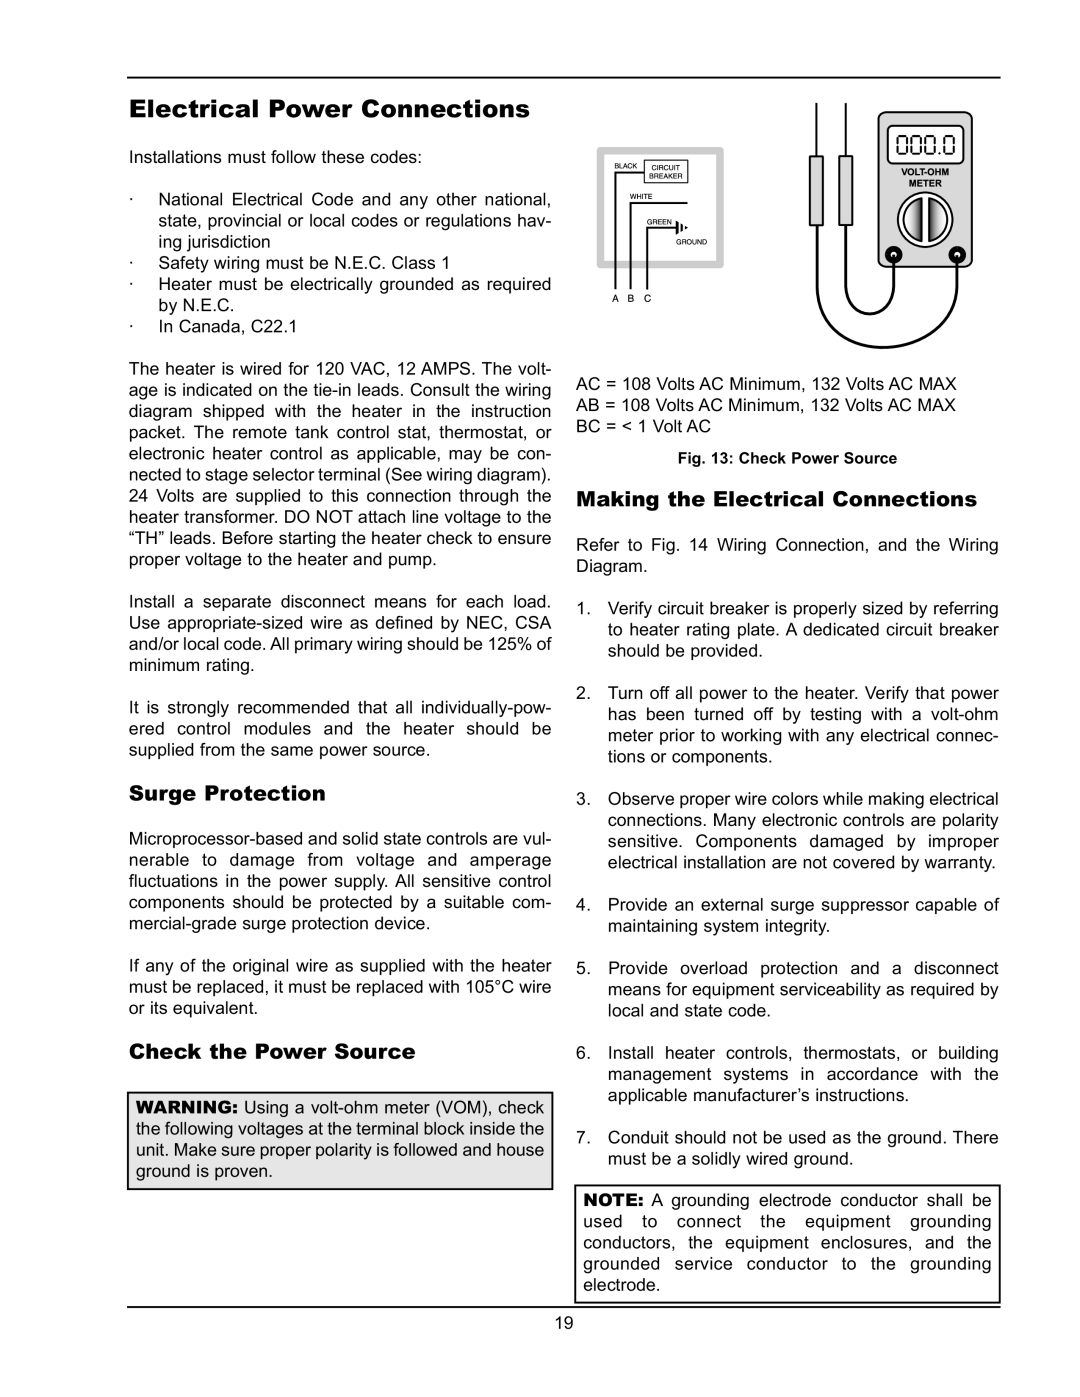 Raypak 122-322 Electrical Power Connections, Surge Protection, Check the Power Source, Making the Electrical Connections 